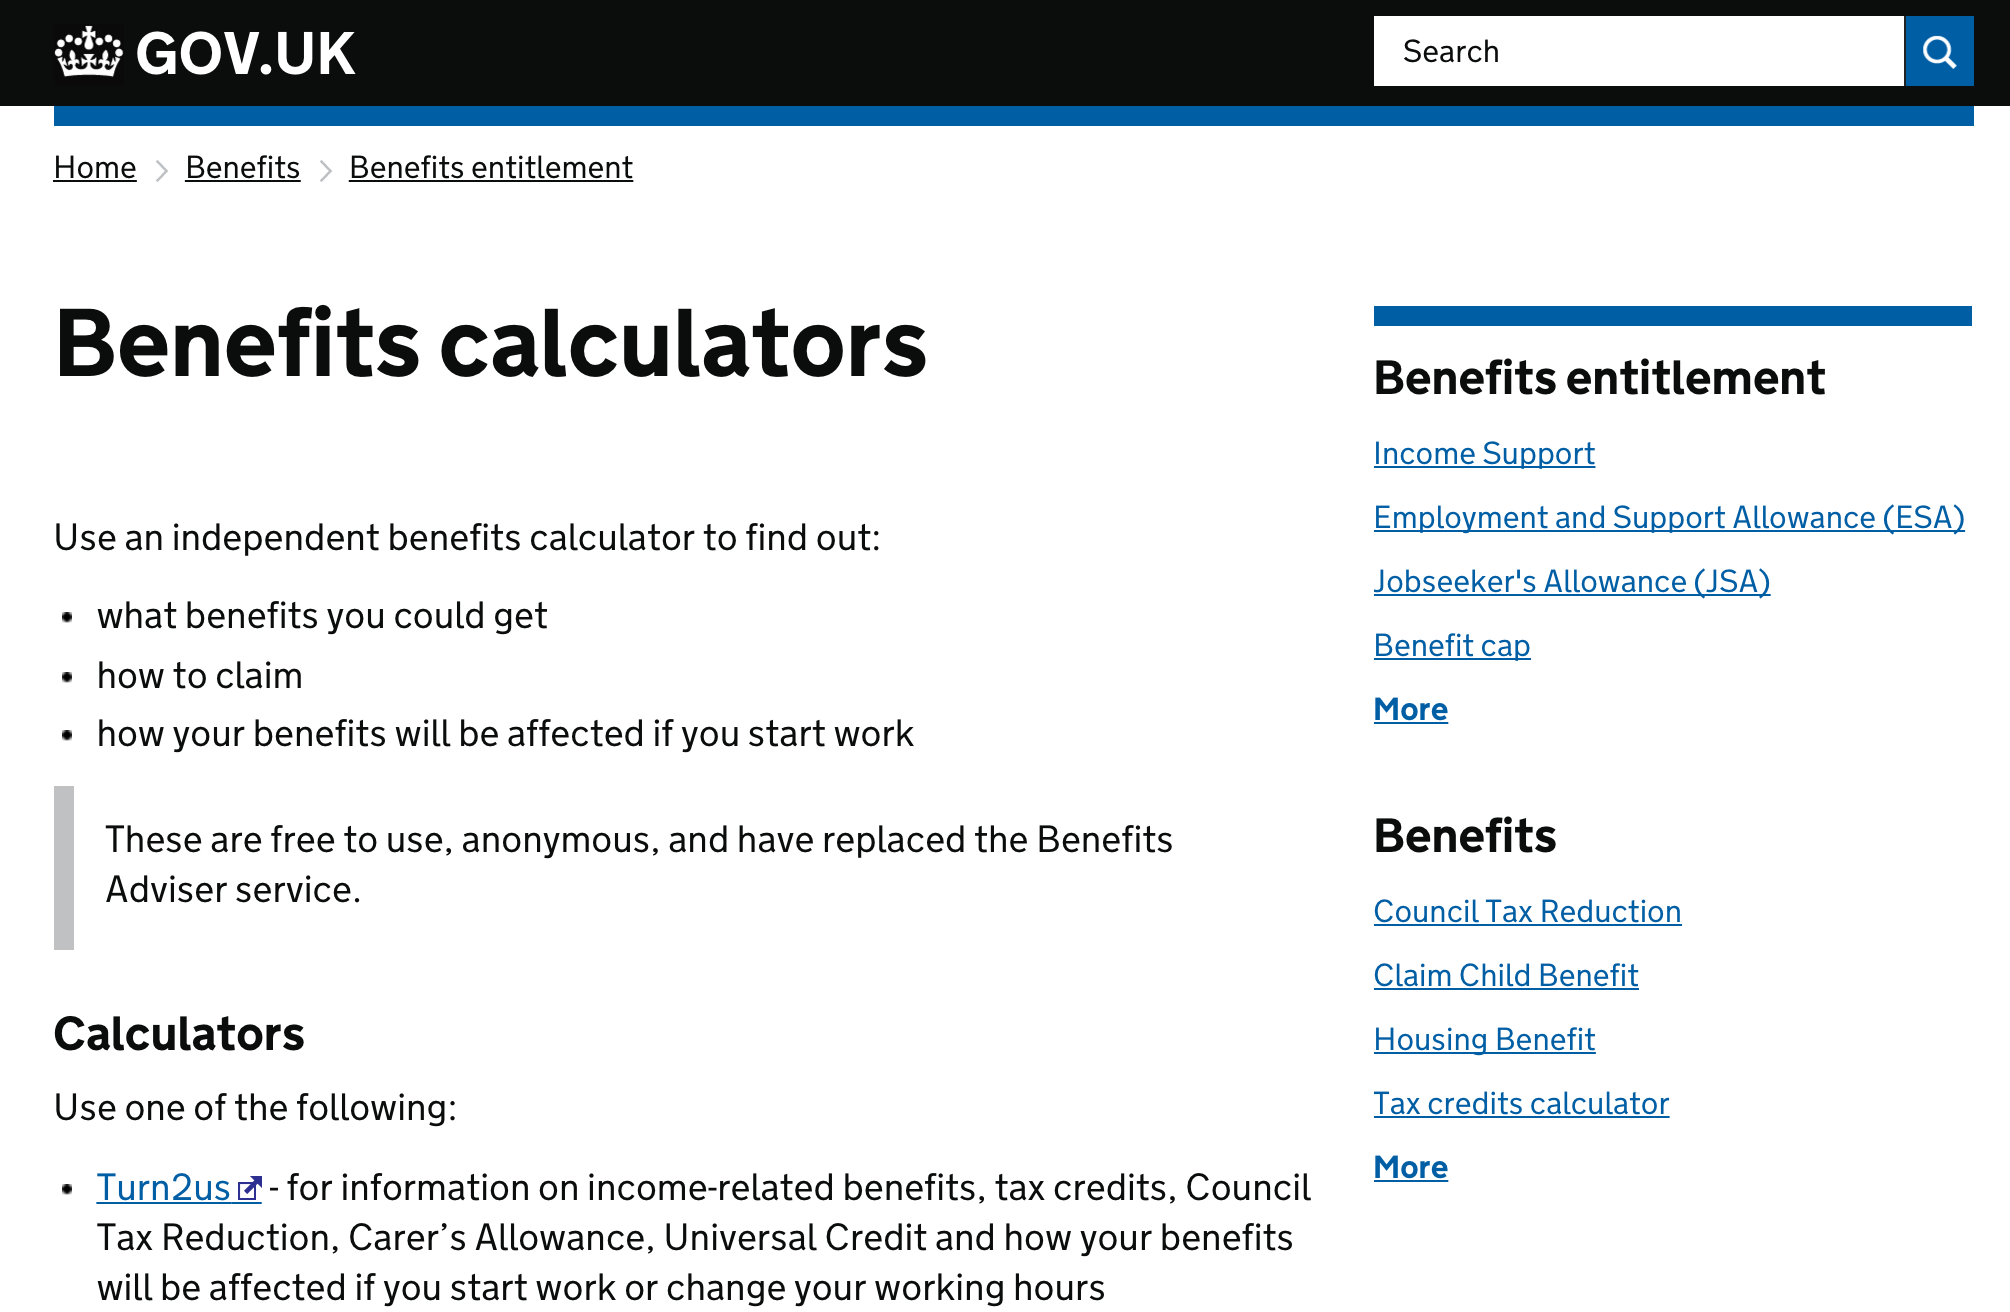 A screenshot of the Benefits Calculator page.